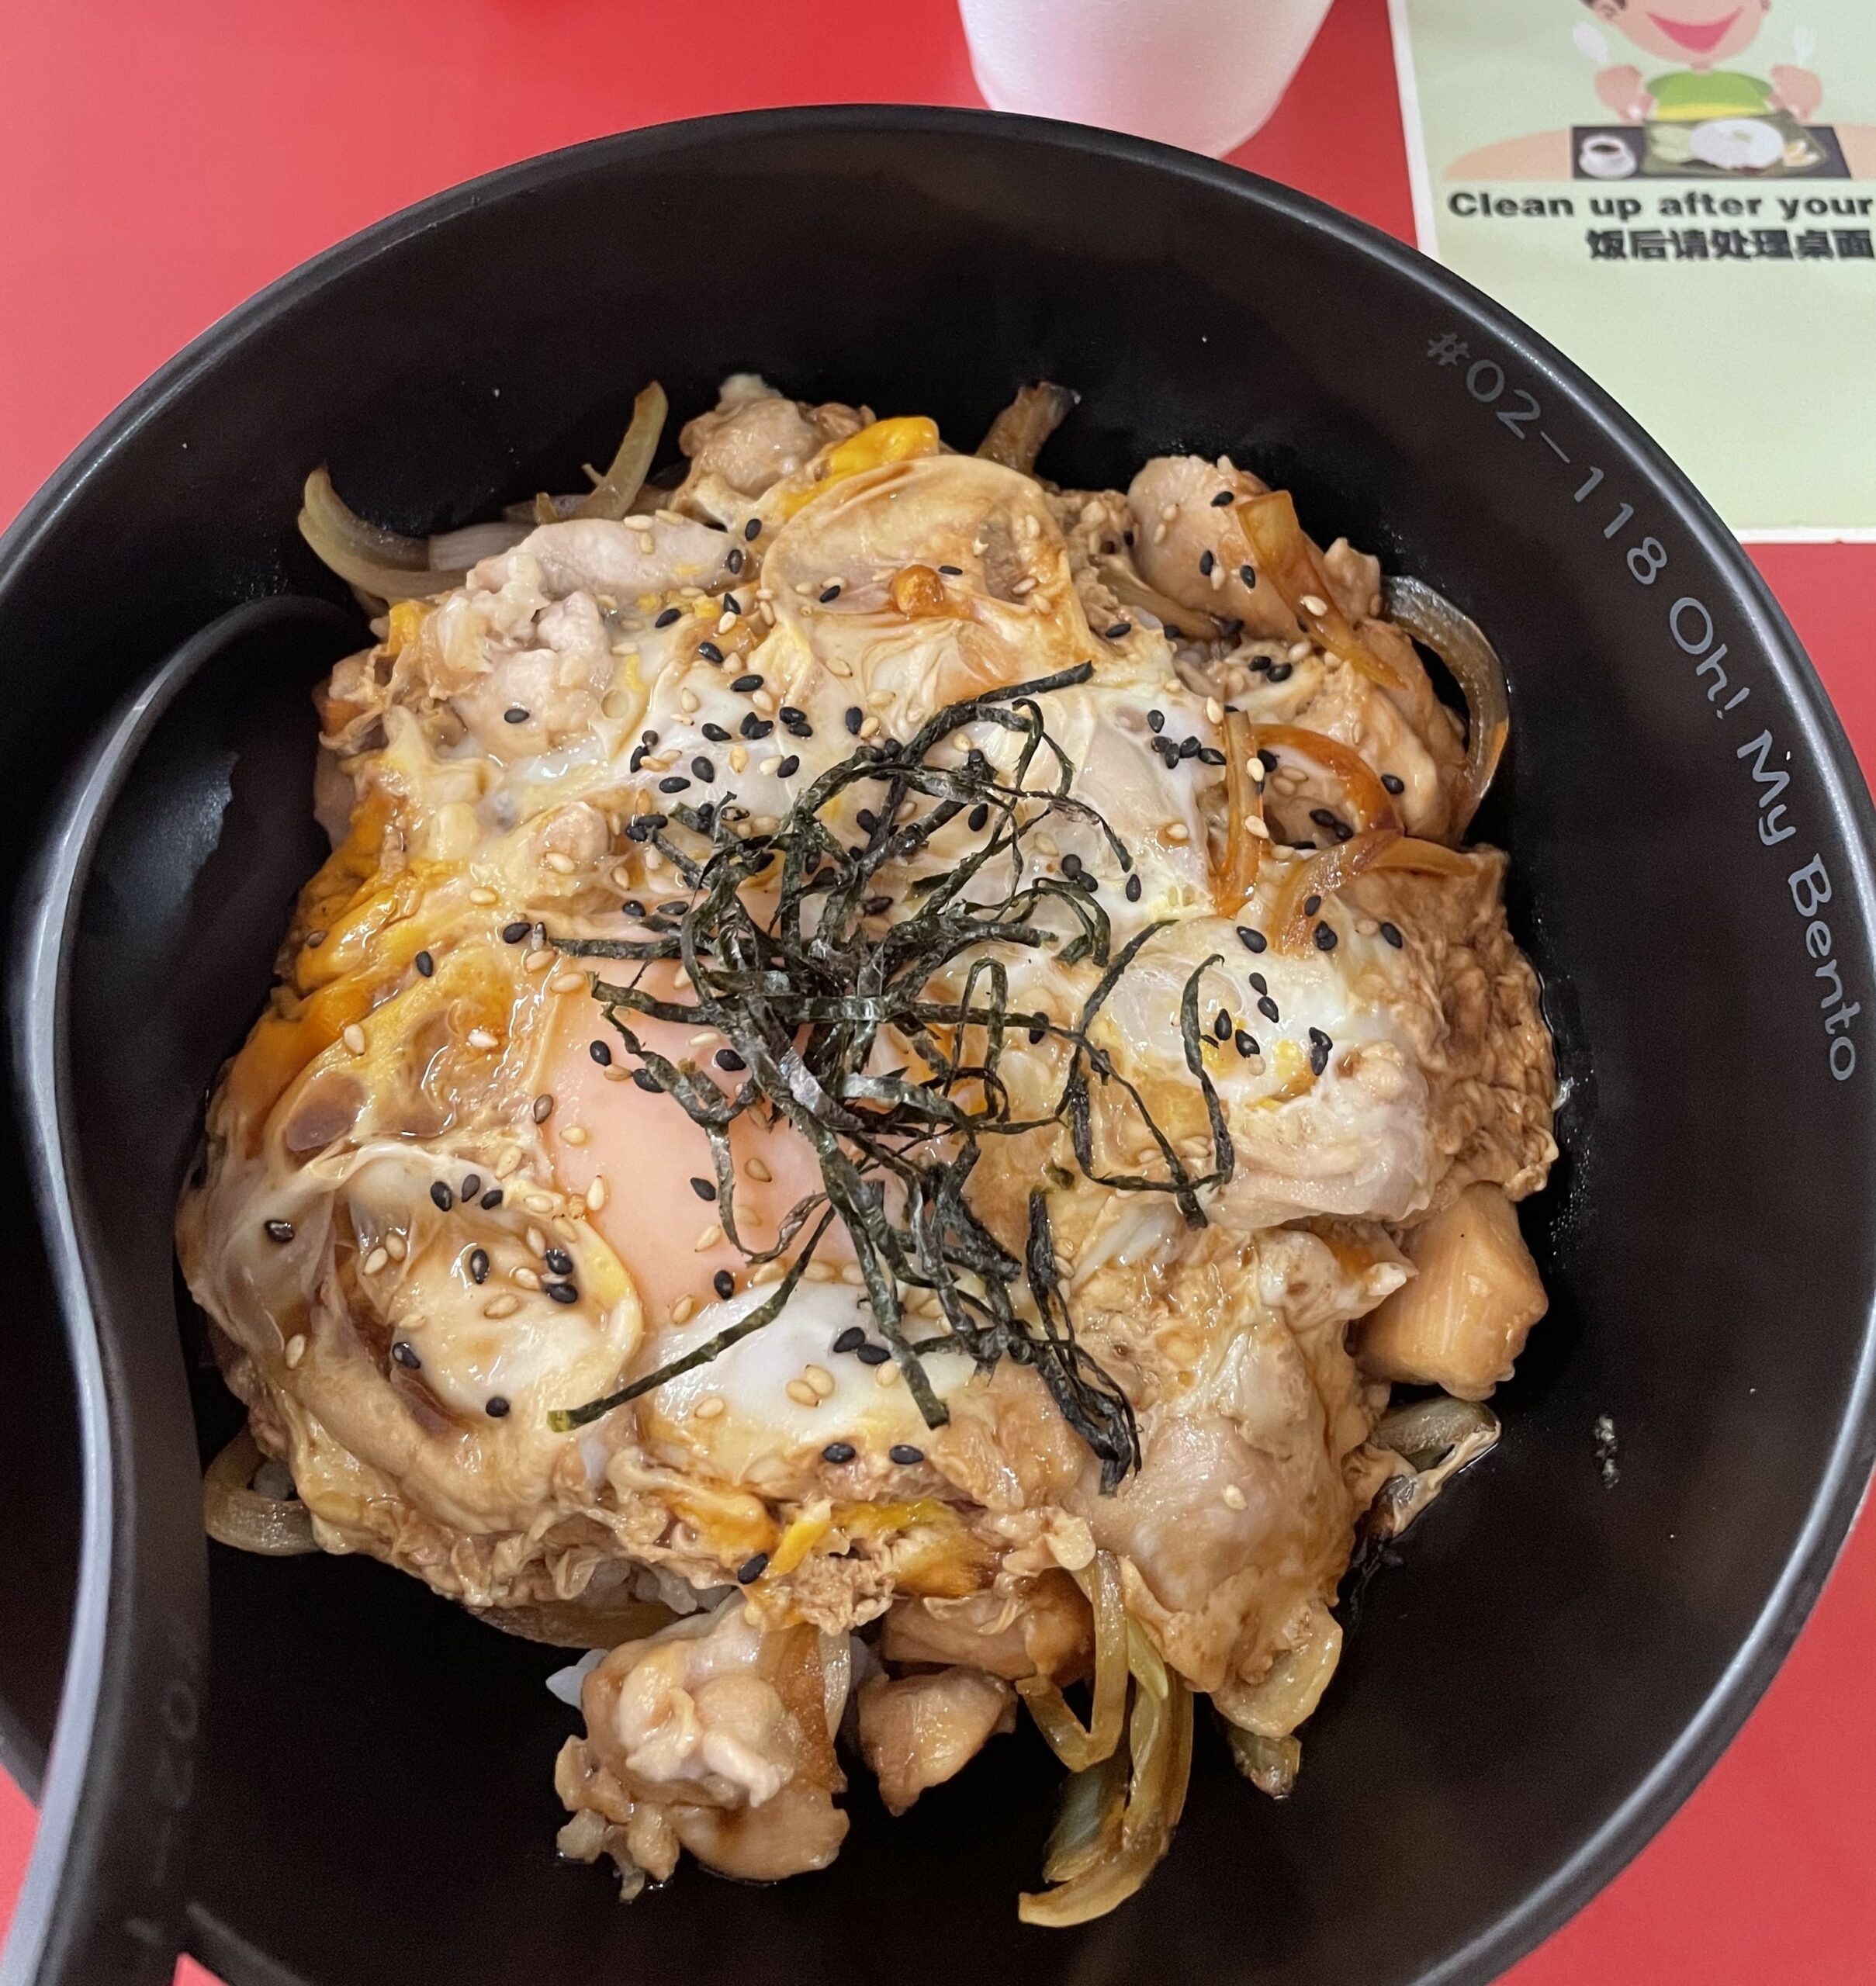 chicken egg rice bowl from oh! my bento located at chinatown complex food centre